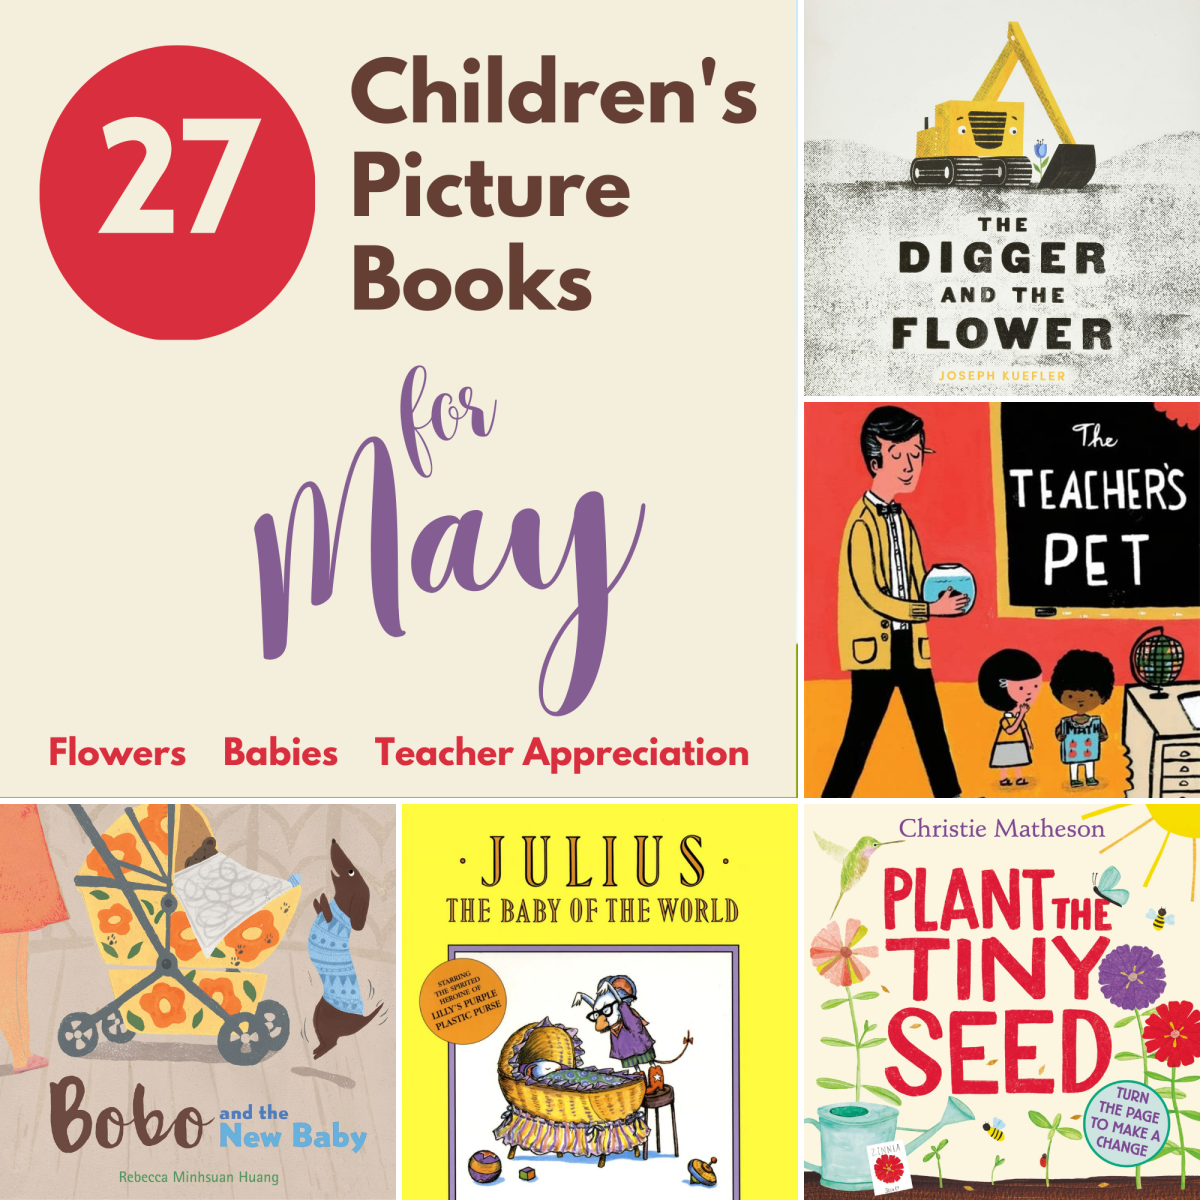 27 Children's Picture Books for May: Flowers, Babies, Teachers Themes